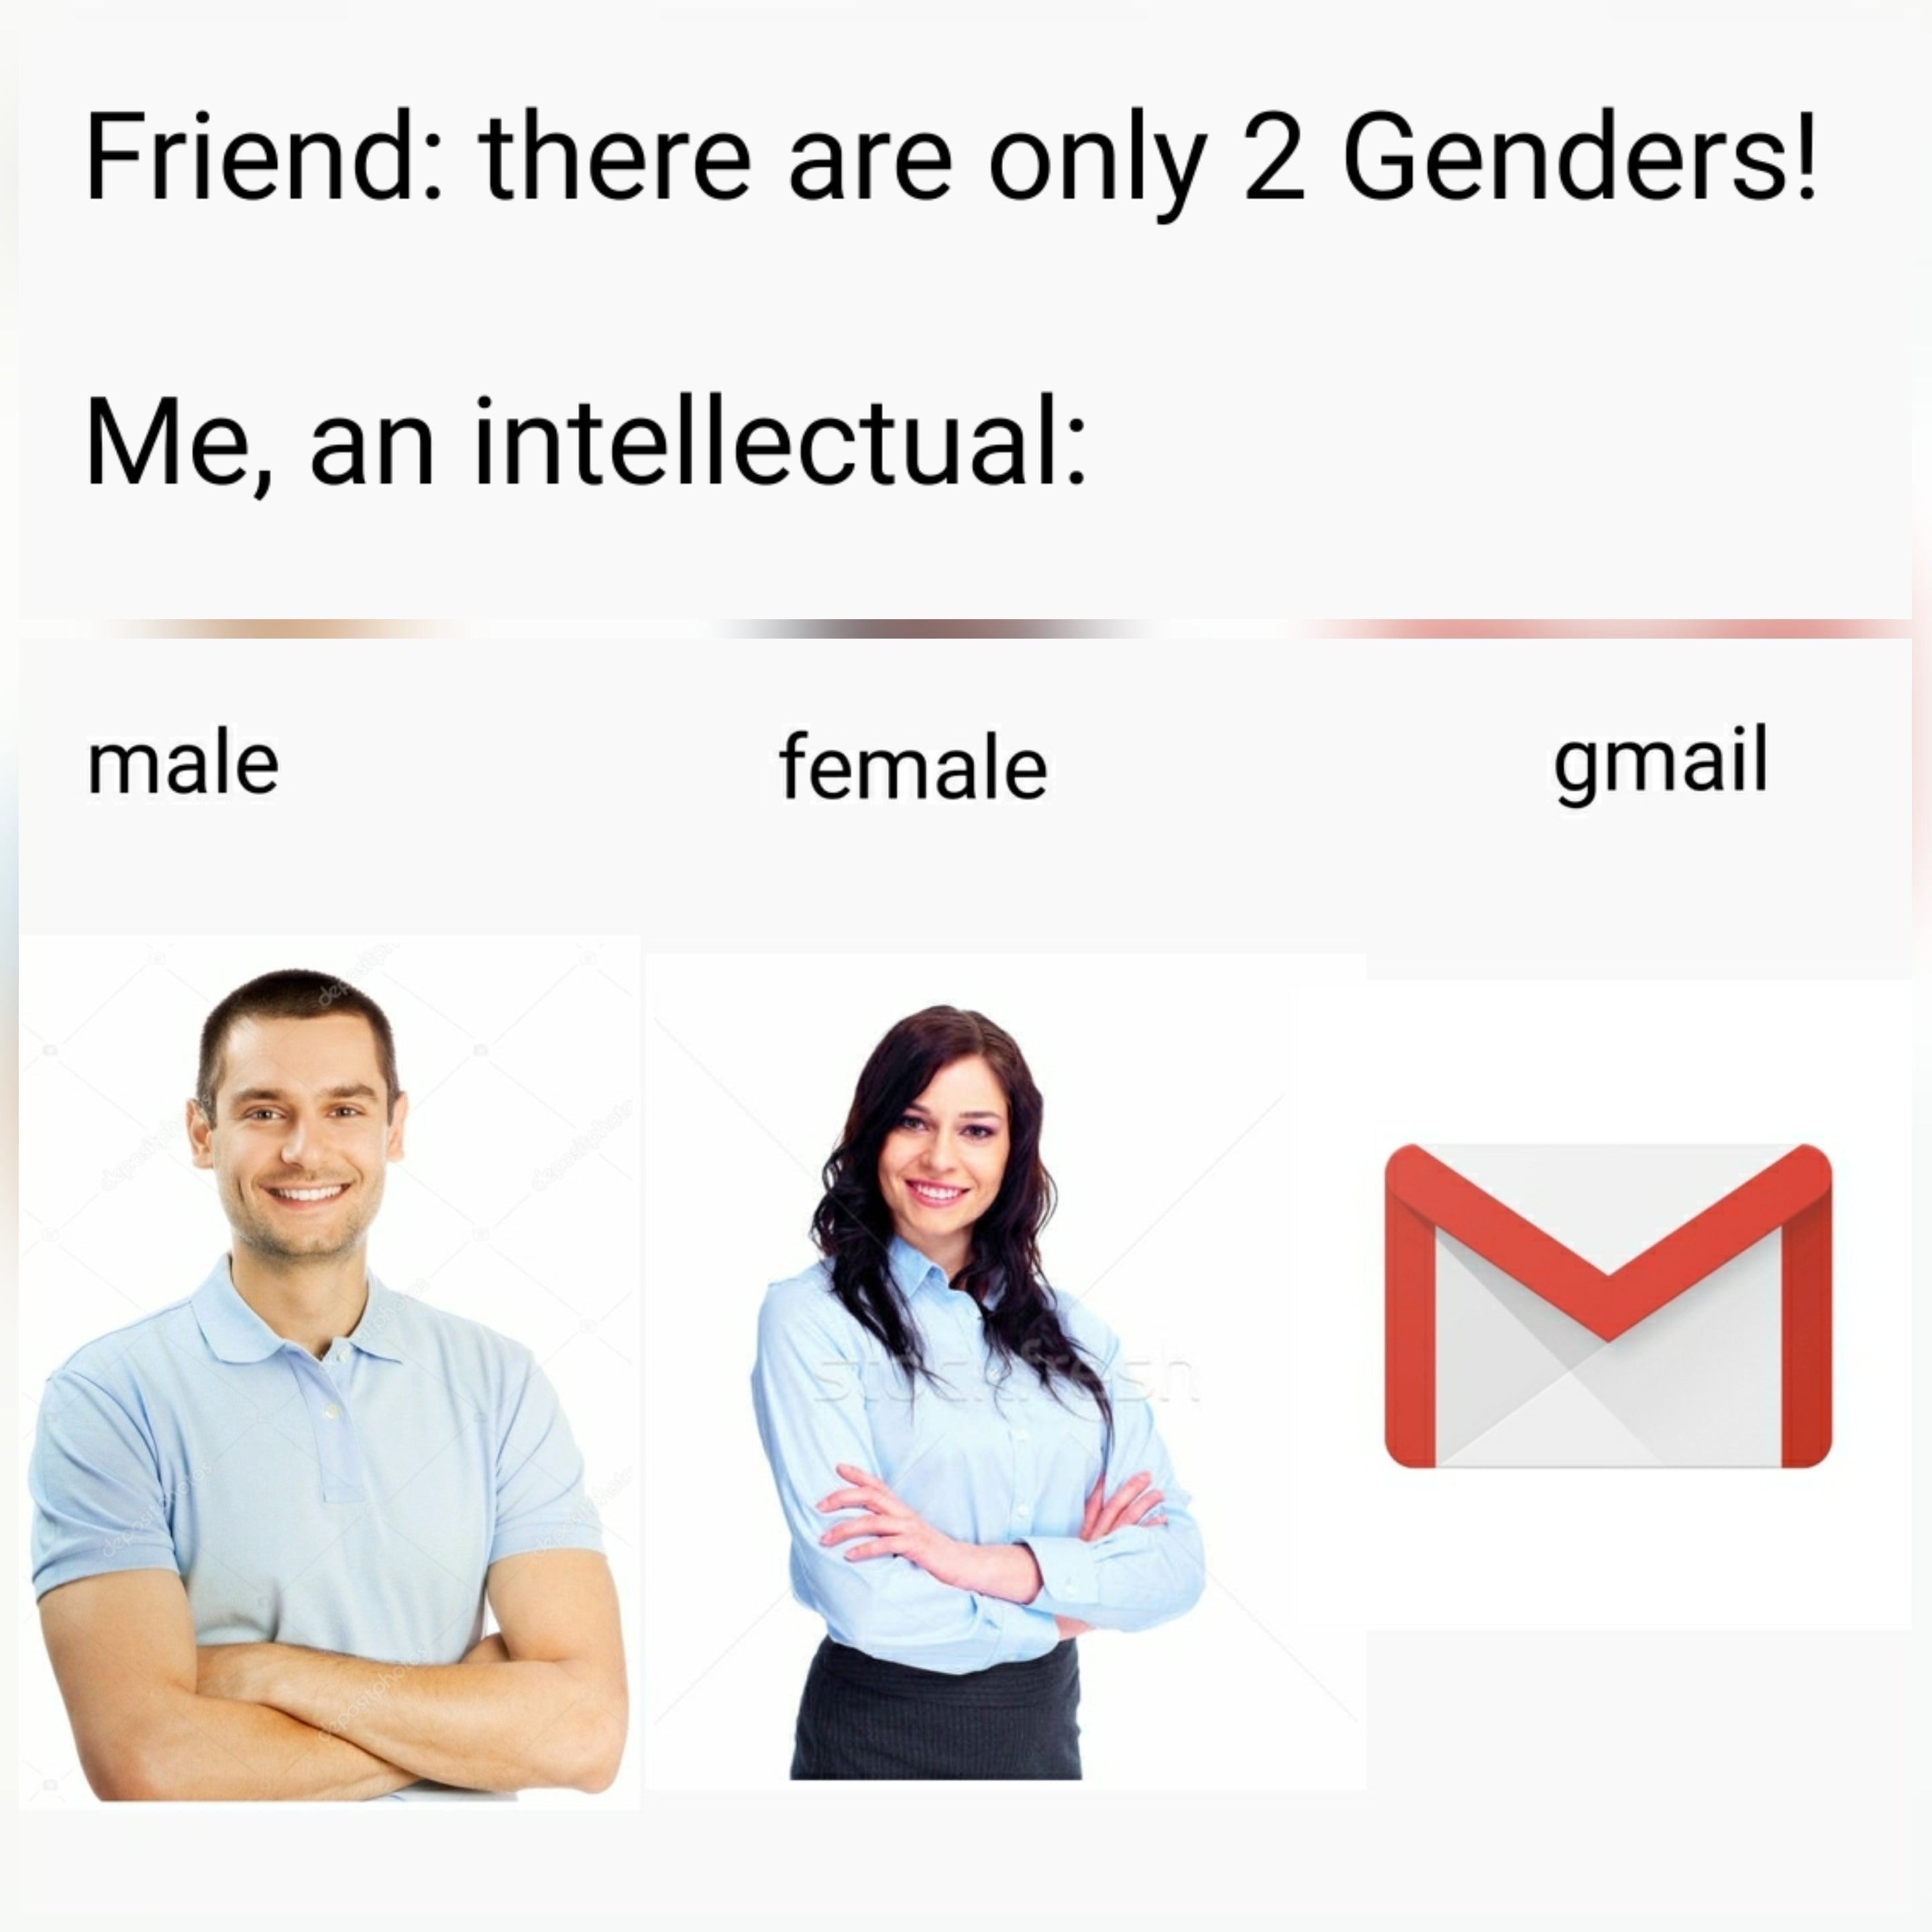 funny memes - dank memes - conversation - Friend there are only 2 Genders! Me, an intellectual male female gmail M